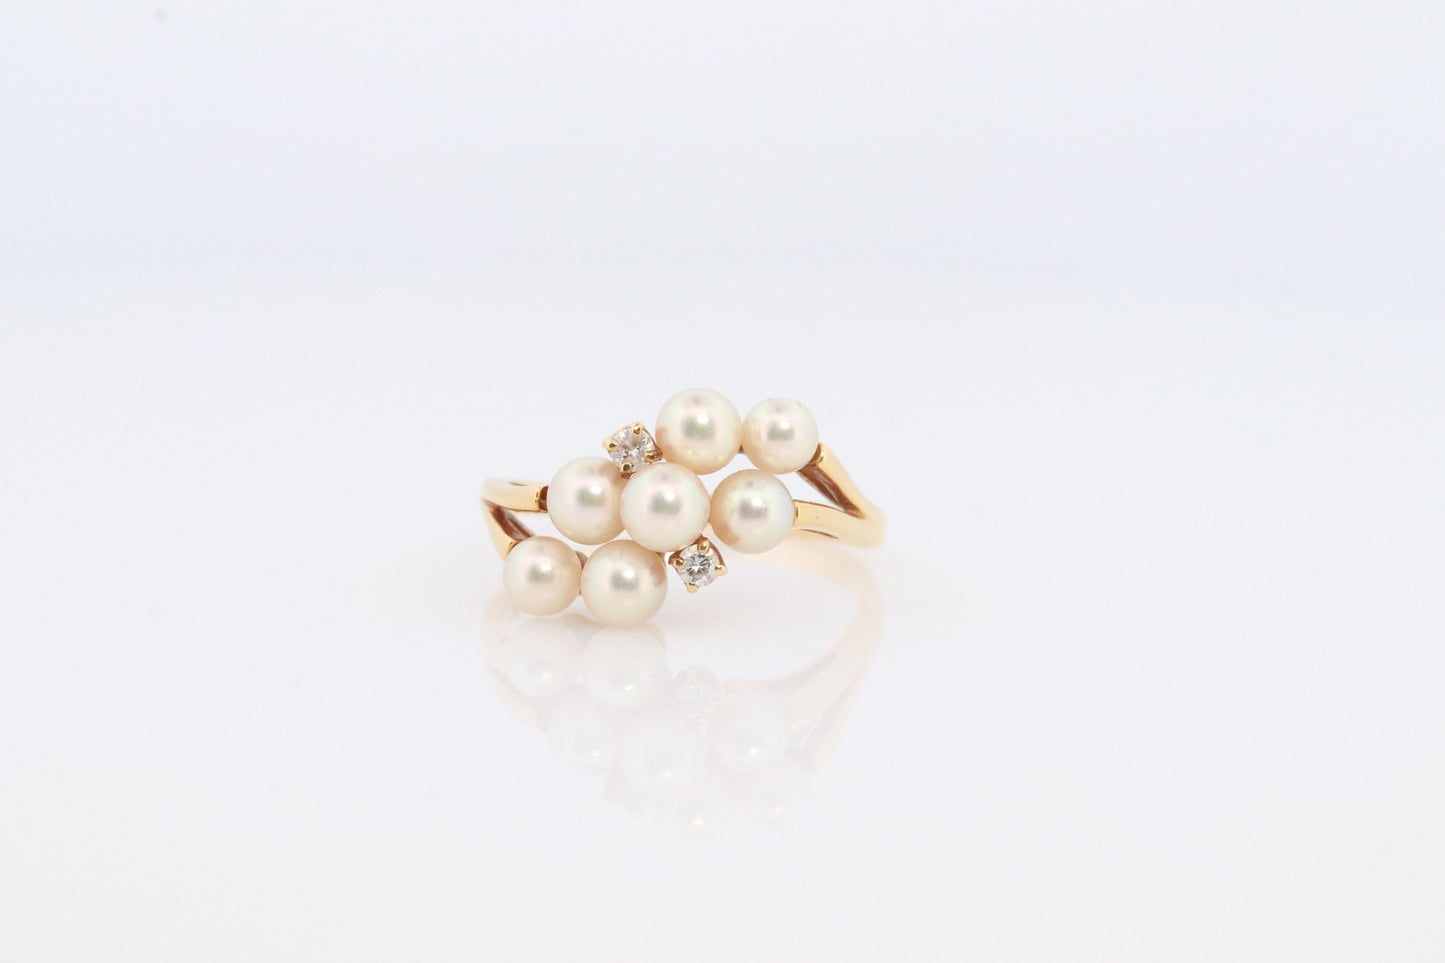 18k MIKIMOTO Cluster pearl ring. Mikimoto 750 saltwater pearl and diamond cluster bypass ring. Grape vine pearls.